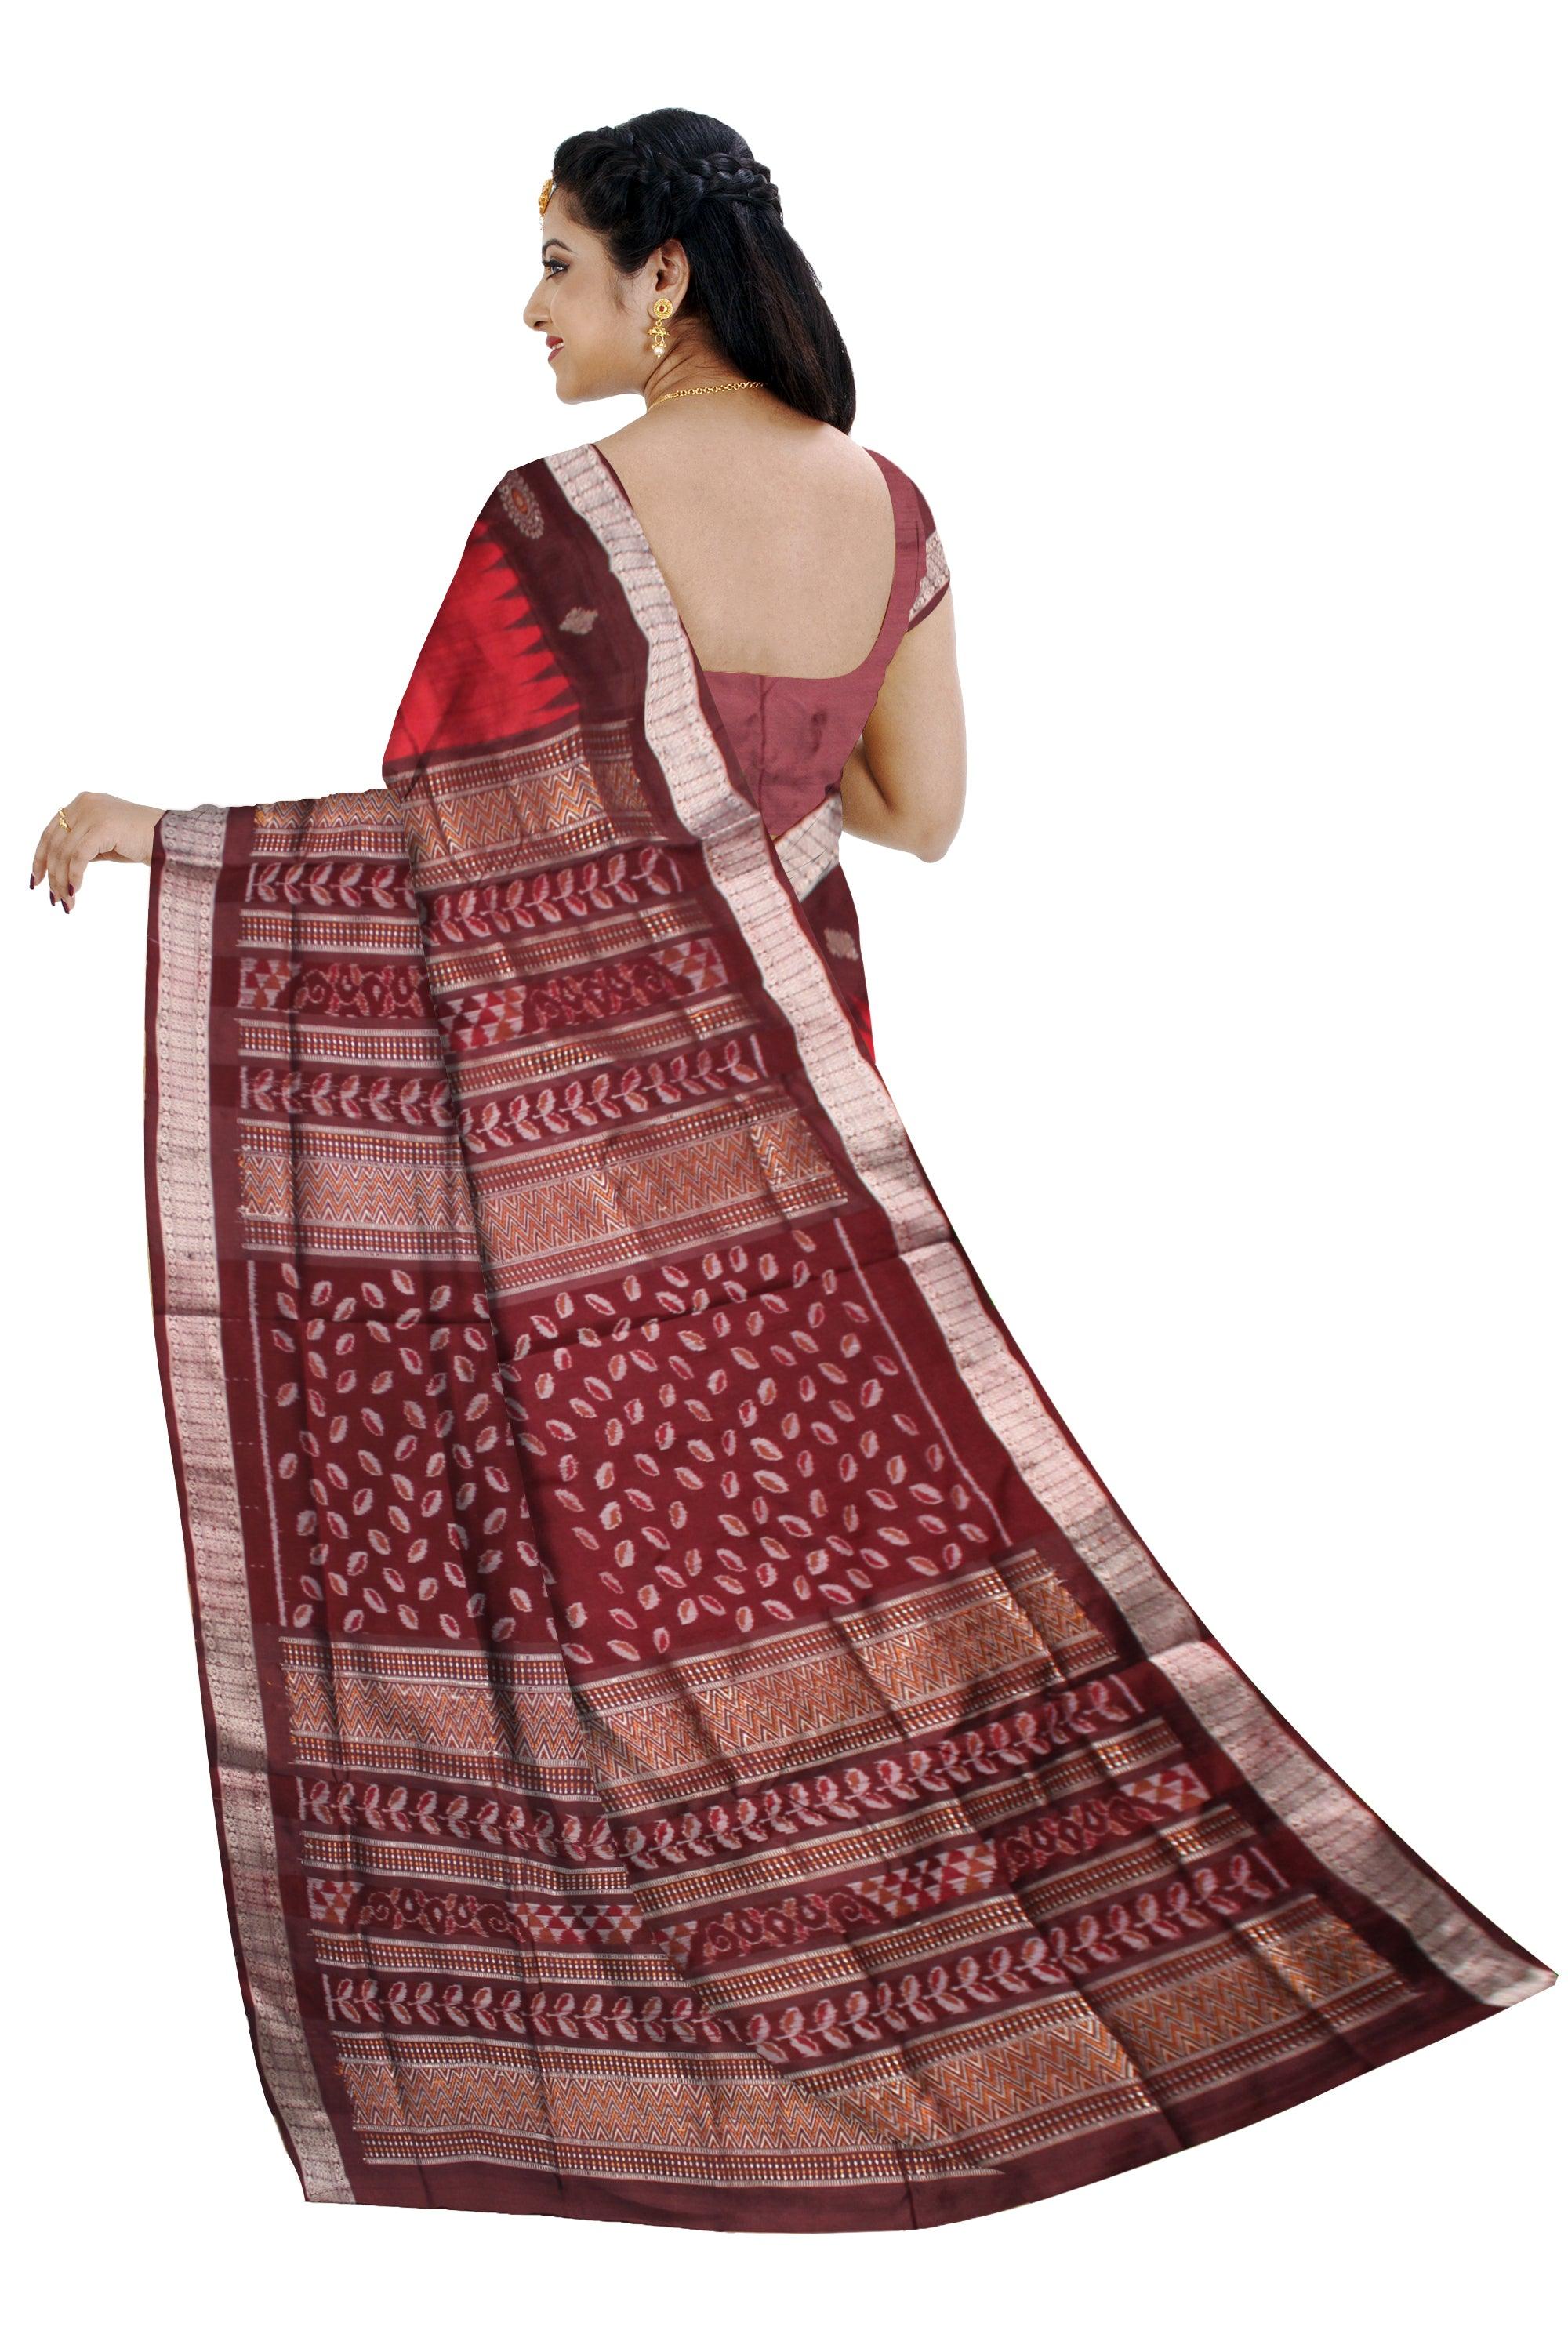 LATEST TREE AND TERRACOTTA PATTERN BOMKEI PATA SAREE IN MAROON AND COFFEE COLOR BASE, ATTACHED WITH BLOUSE PIECE. - Koshali Arts & Crafts Enterprise